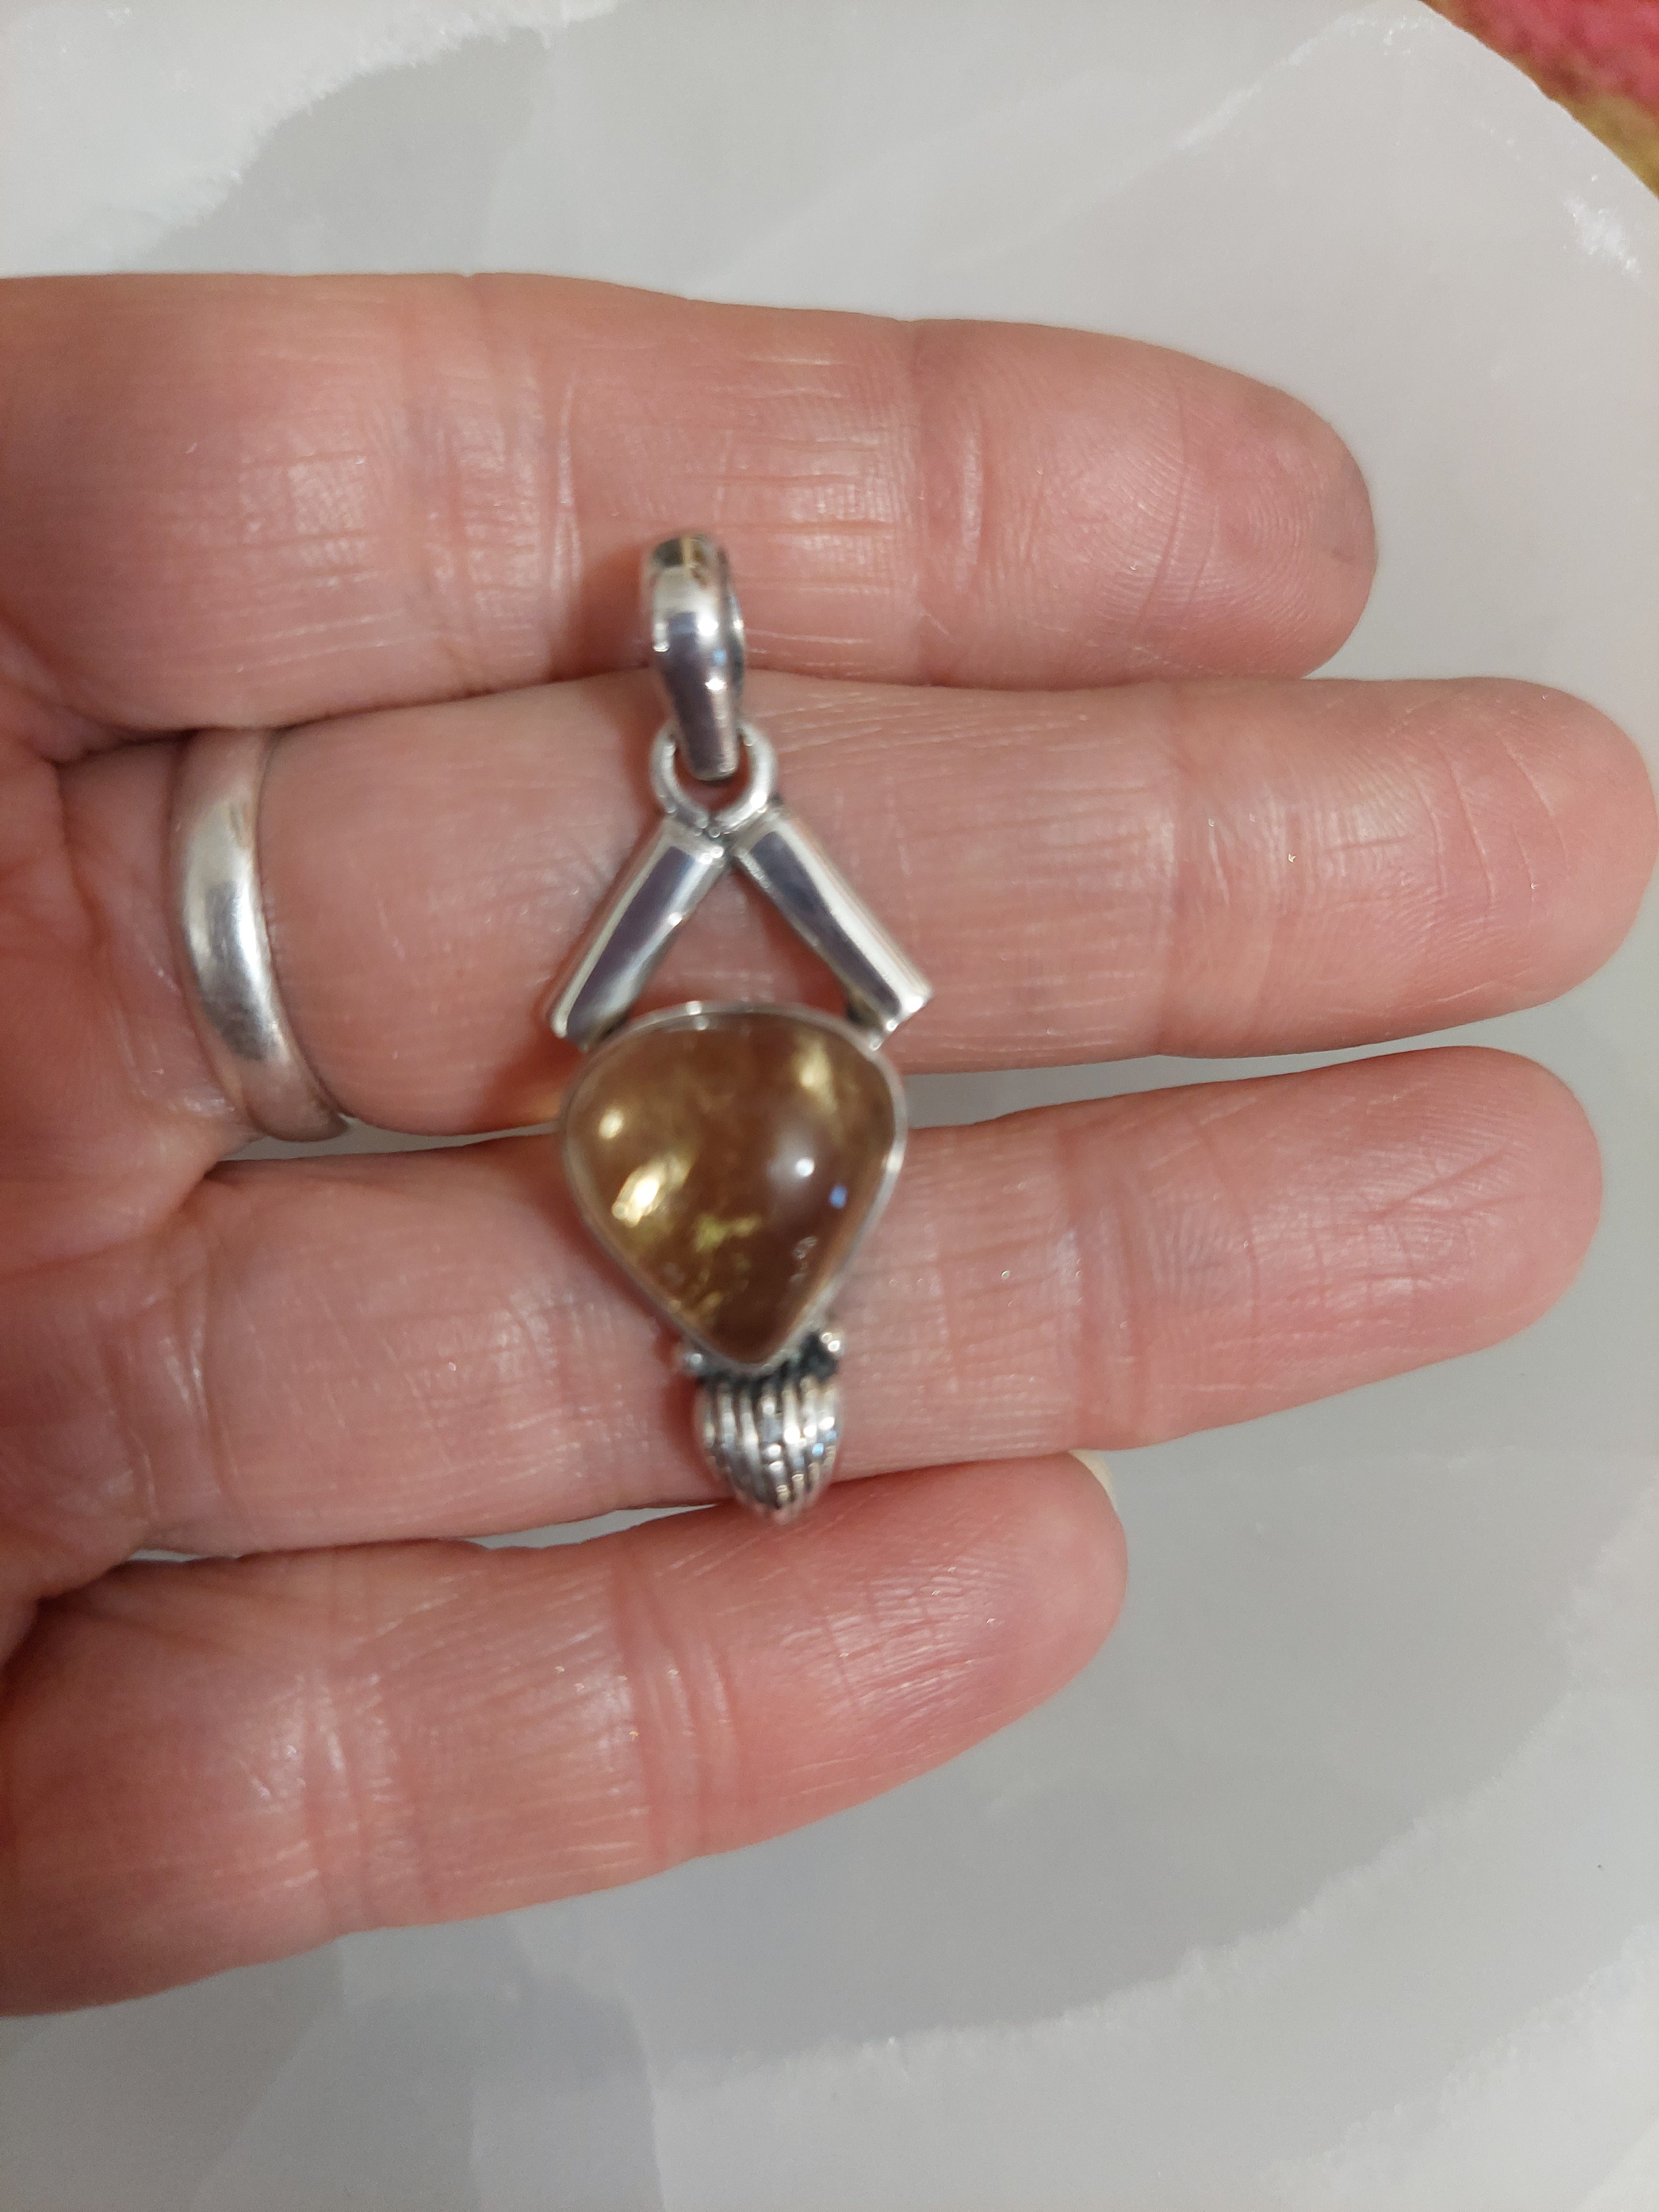 Citrine Pendant with Triangular stone - 925 Sterling Silver